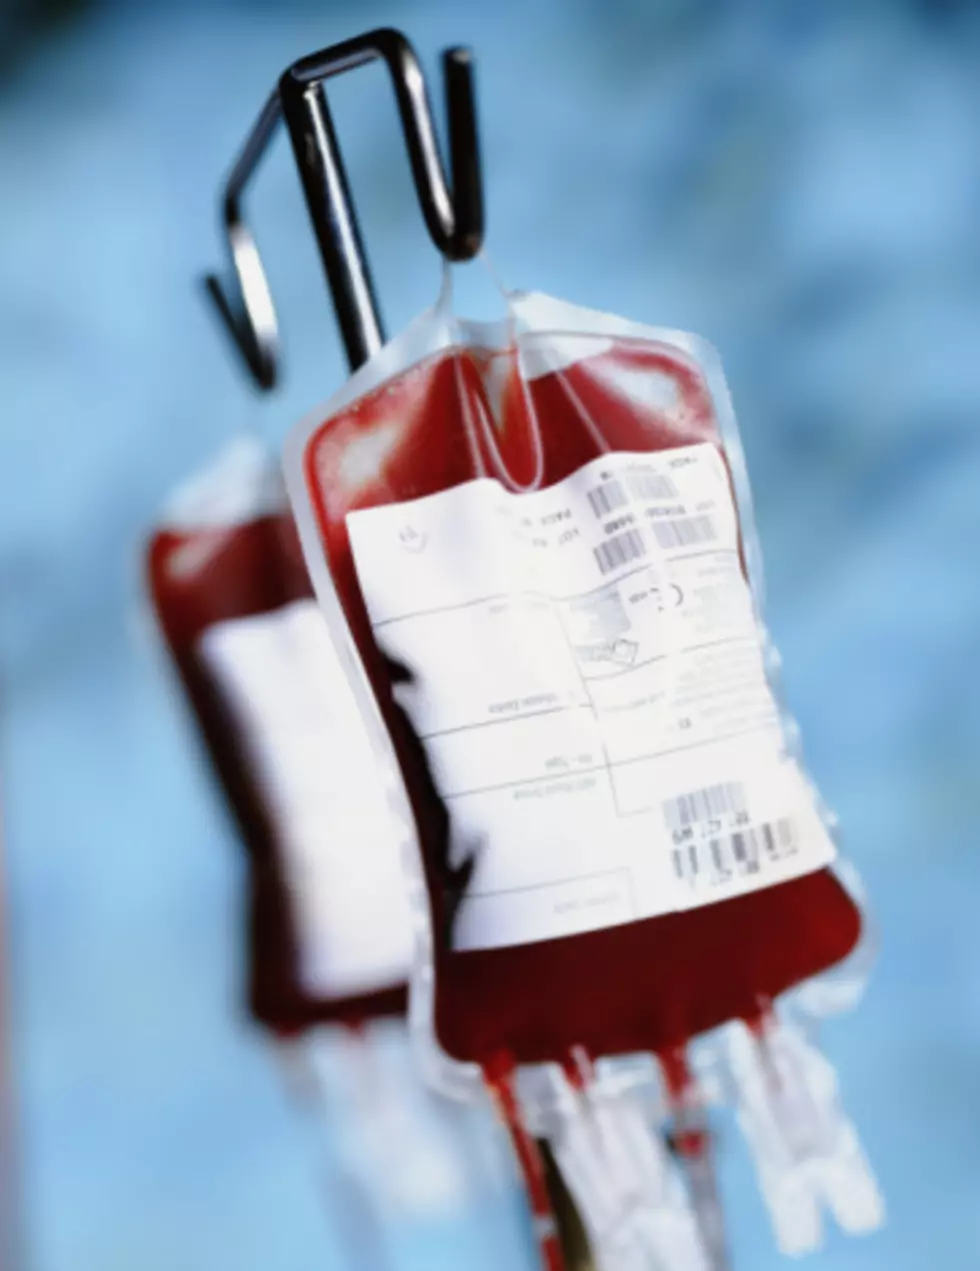 Donors Needed: Critical Blood Shortage